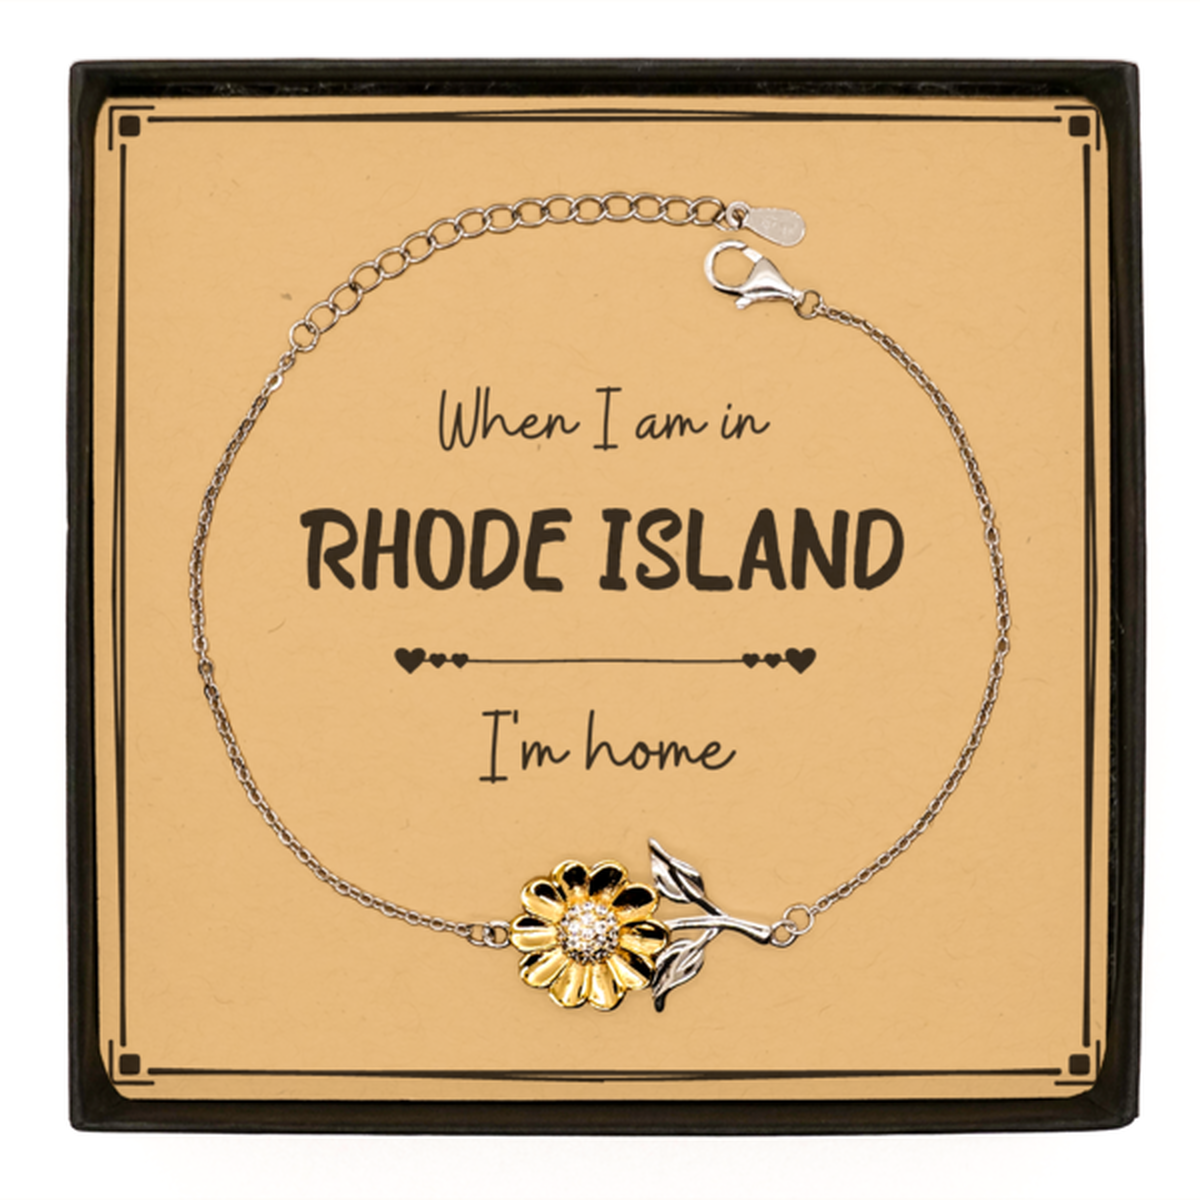 When I am in Rhode Island I'm home Sunflower Bracelet, Message Card Gifts For Rhode Island, State Rhode Island Birthday Gifts for Friends Coworker